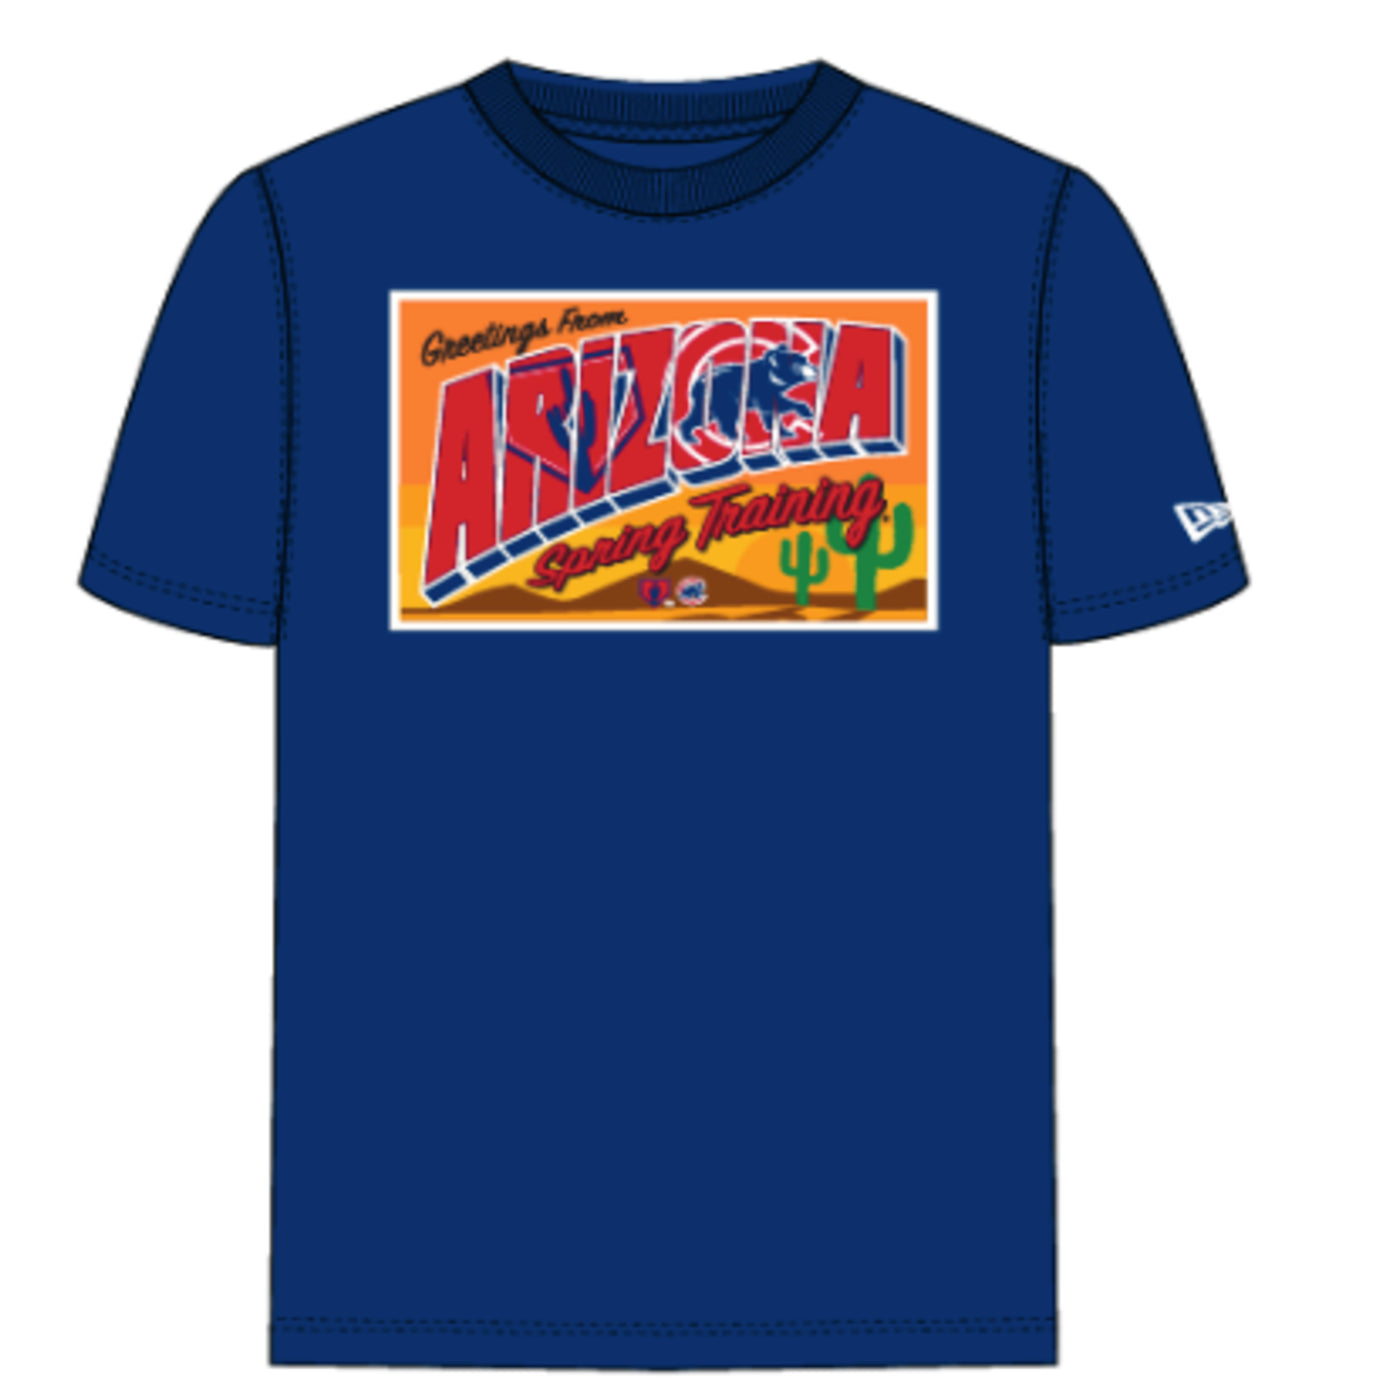 Royal blue Spring Training Shirt for Chicago cubs on a Arizona Postcard style design